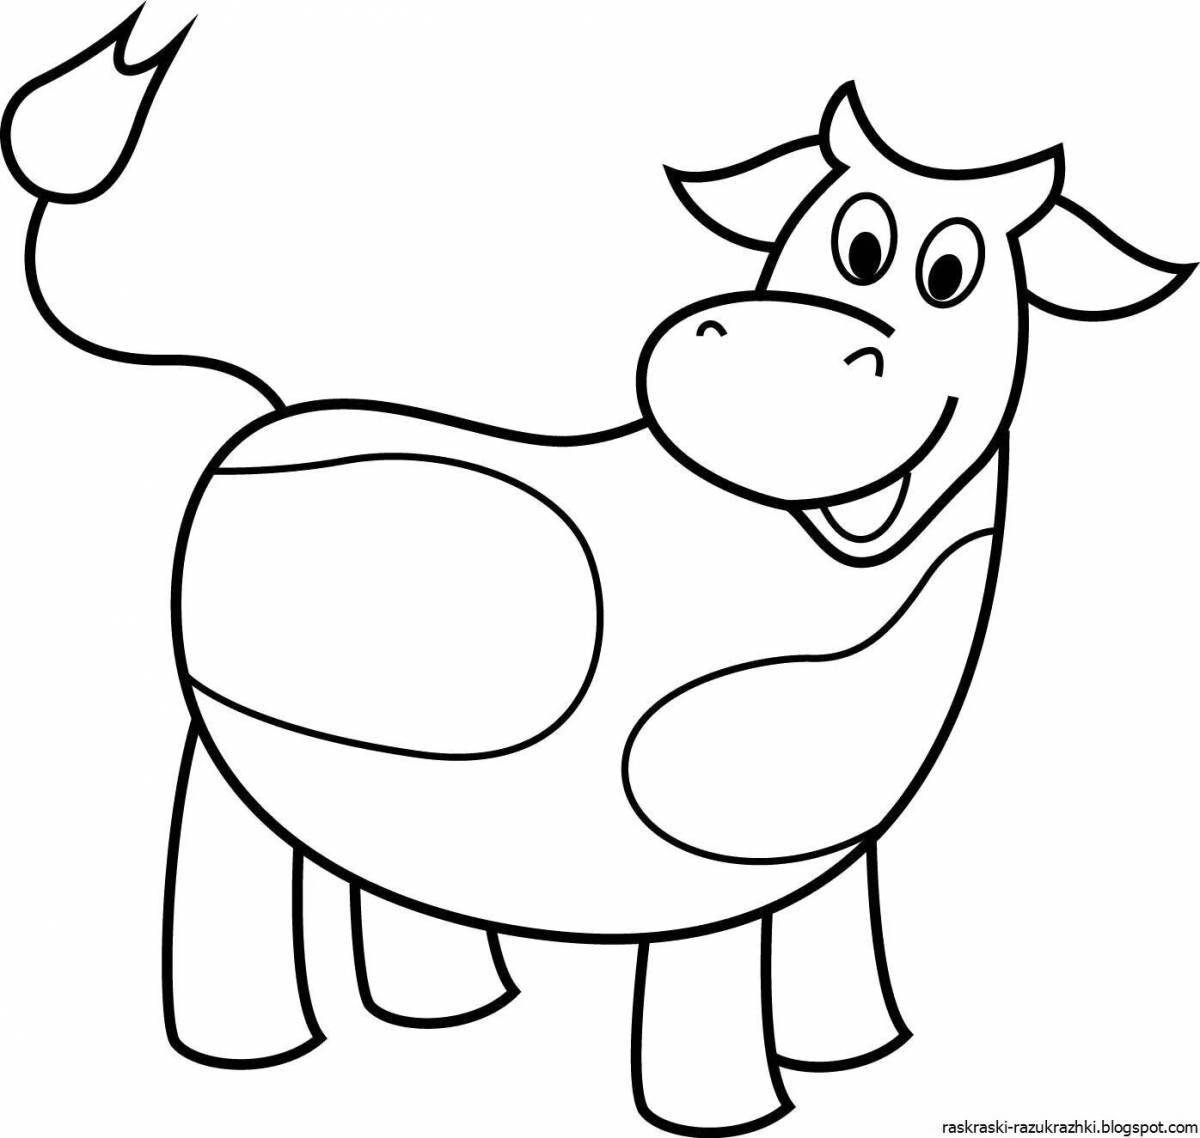 Colouring bright cow for kids